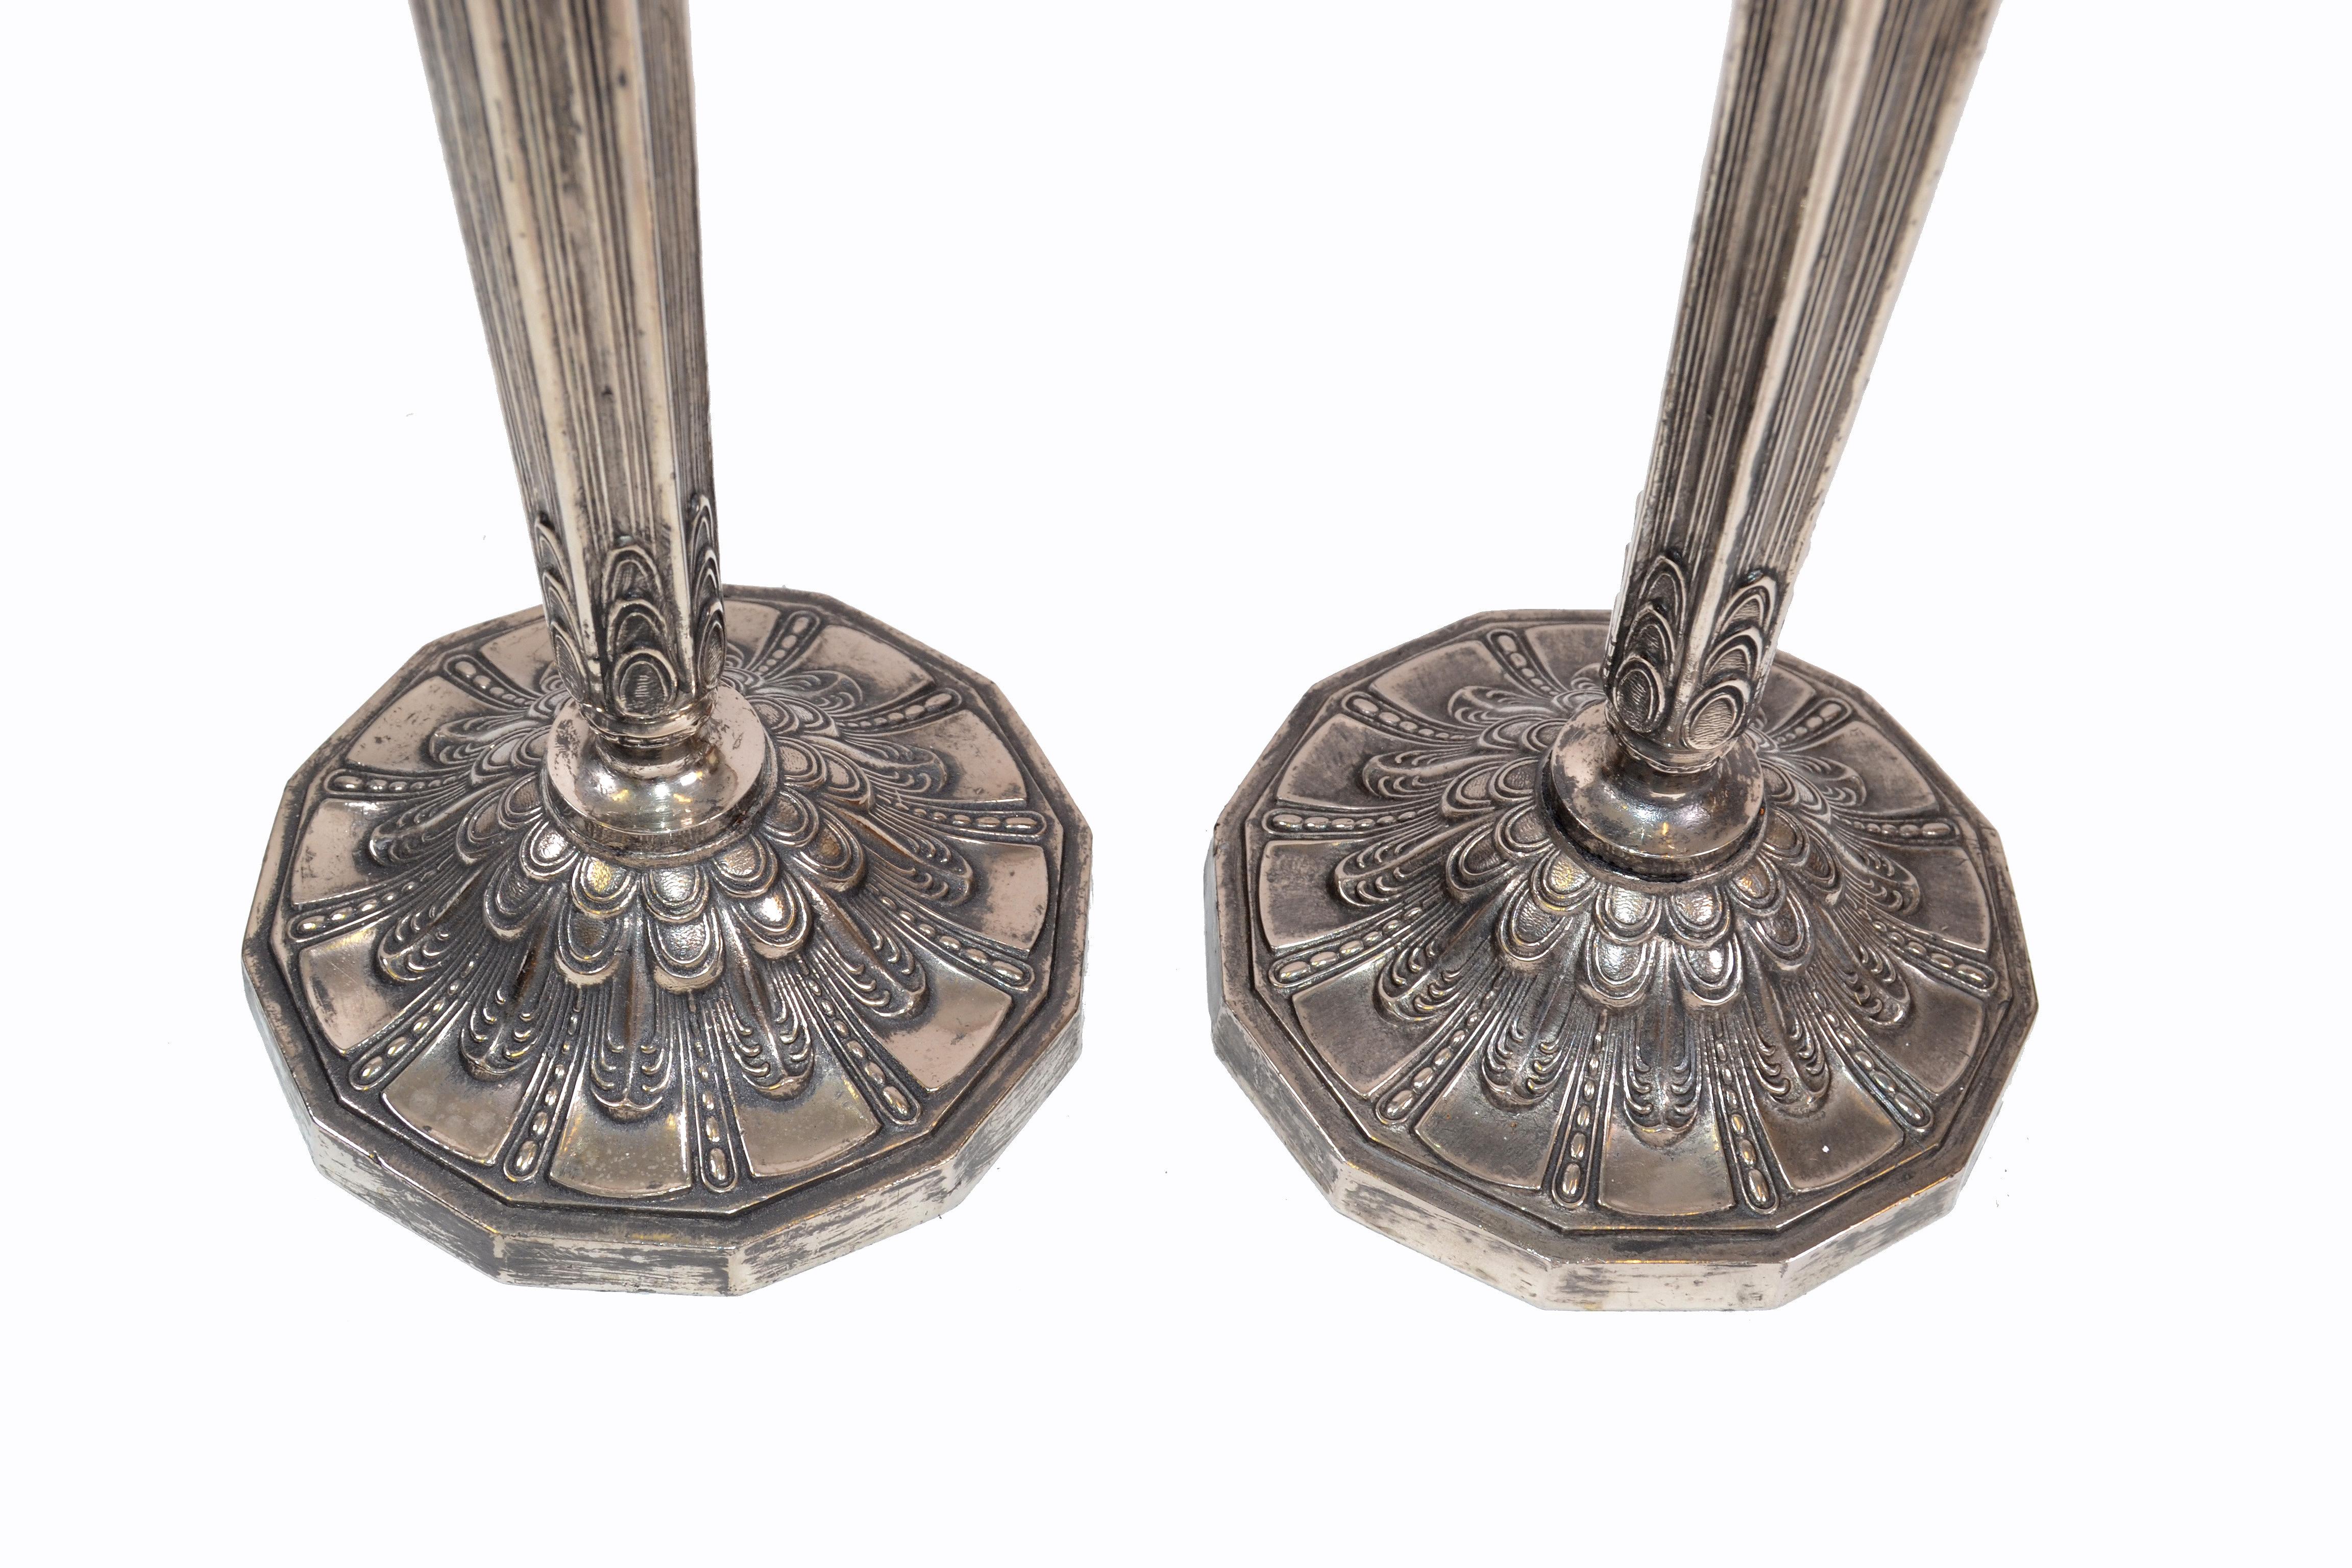 George III Silver Plated Heavy Candelabras, Candleholders, Candlesticks, Pair 1